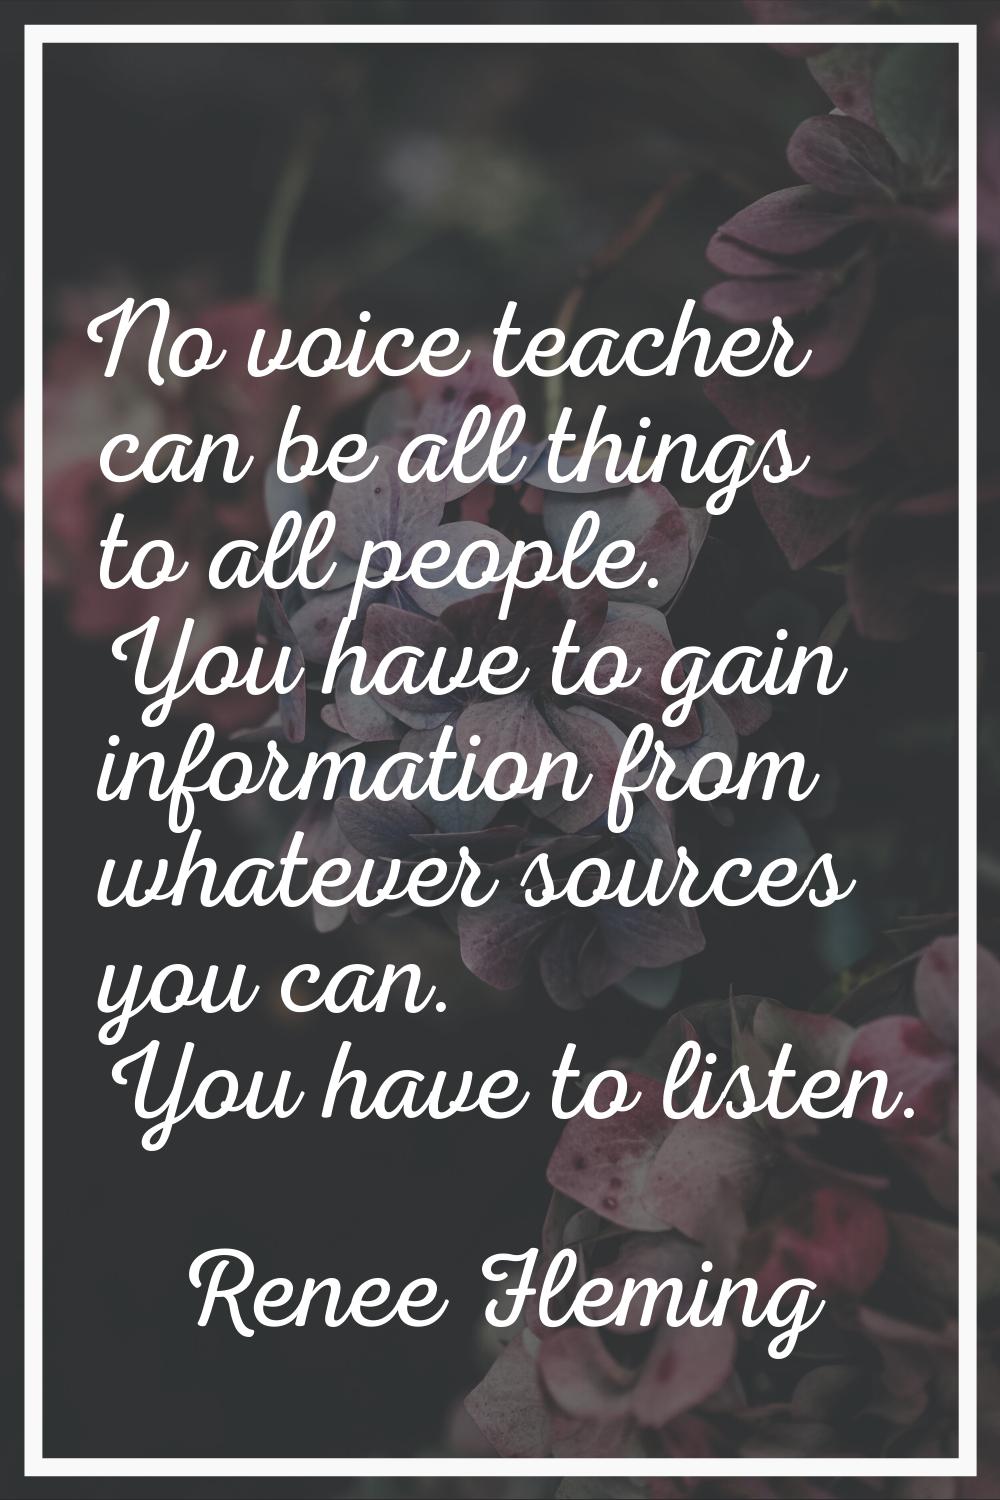 No voice teacher can be all things to all people. You have to gain information from whatever source